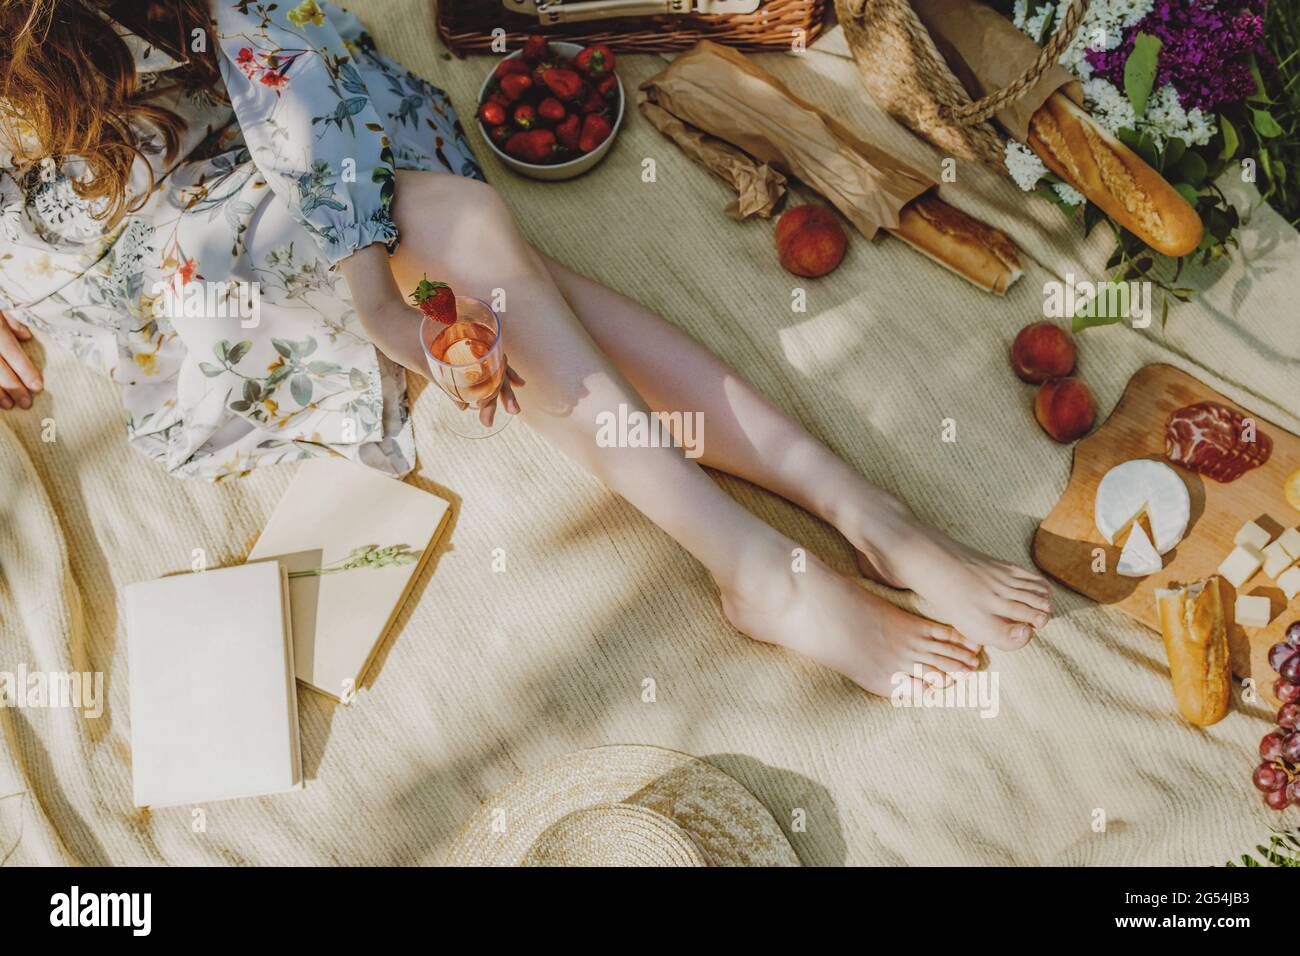 Beautiful legs of young woman in white sitting on blanket and having picnic. Stock Photo